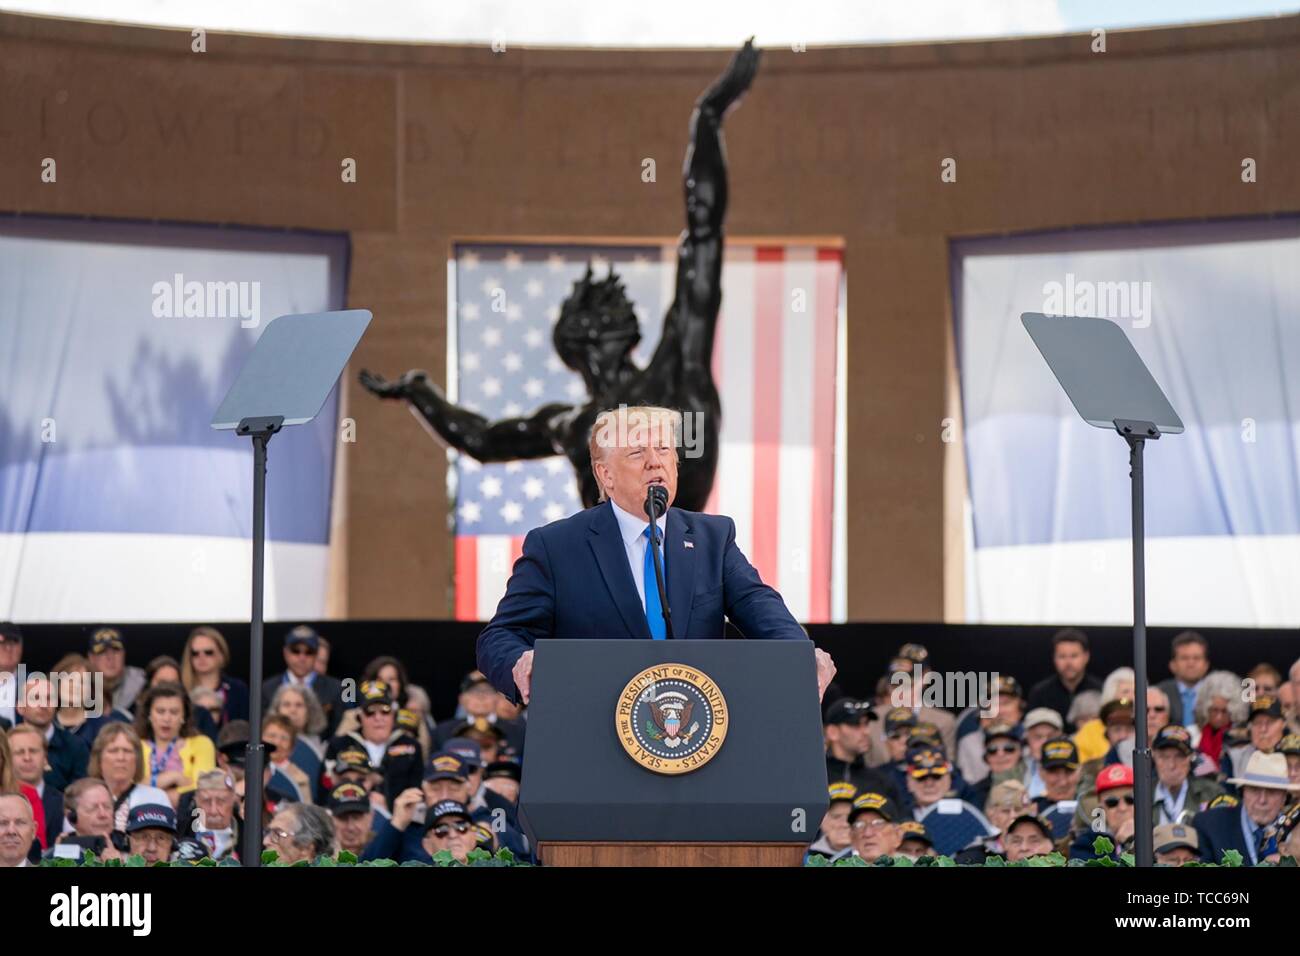 Colleville Sur Mer, France. 06th June, 2019. U.S. President Donald Trump delivers remarks during the commemoration ceremony marking the 75th D-Day Anniversary at the Normandy American Cemetery and Memorial June 6, 2019 in Colleville-sur-Mer, France. Thousands have converged on Normandy to commemorate the 75th anniversary of Operation Overlord, the WWII Allied invasion commonly known as D-Day. Credit: Planetpix/Alamy Live News Stock Photo